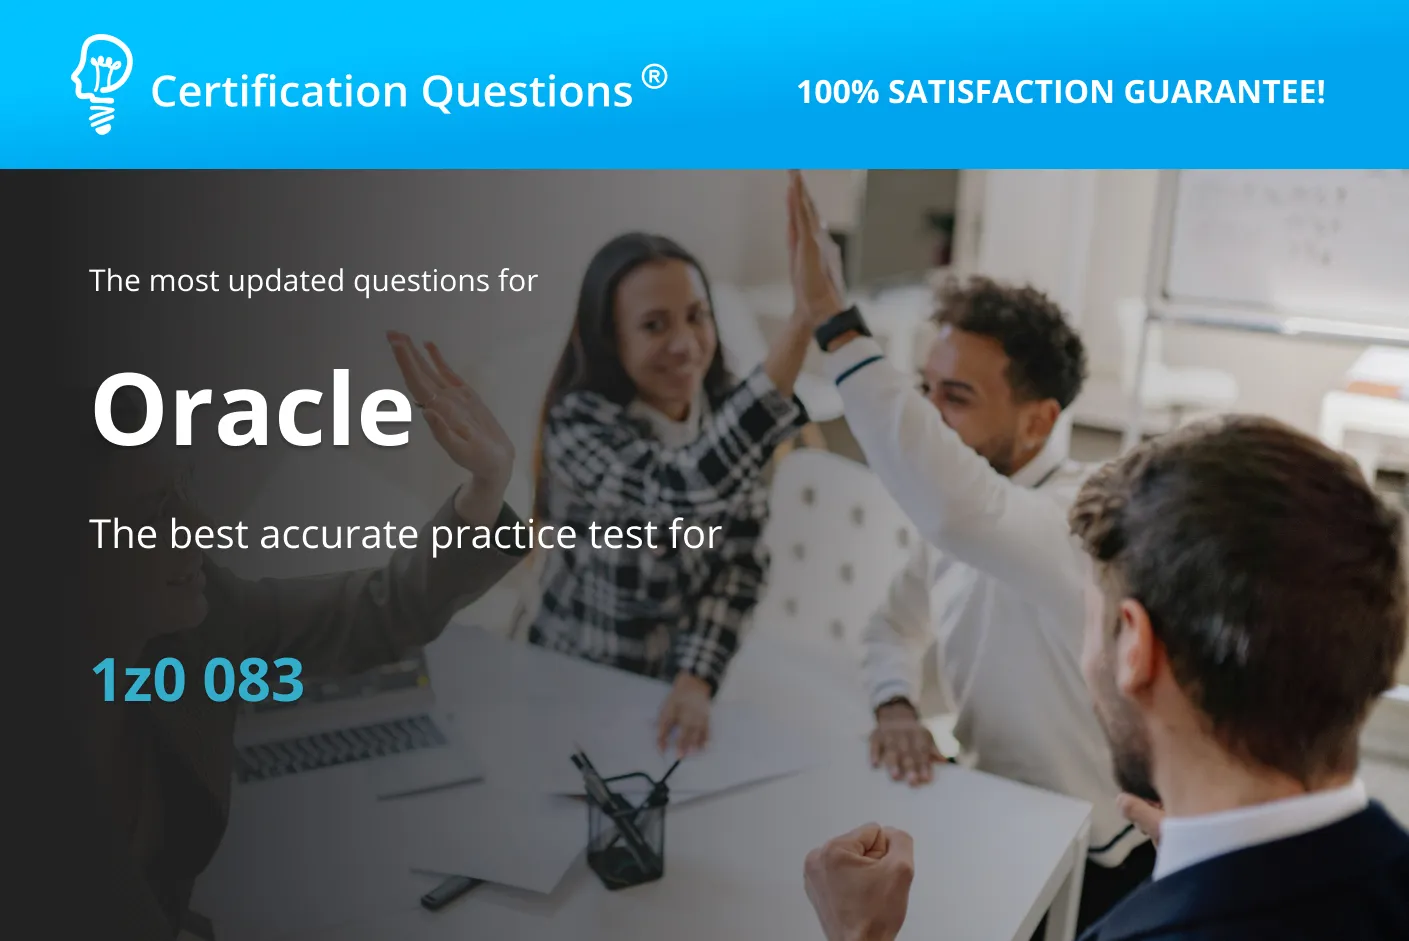 This image is related to oracle database administration exam questions